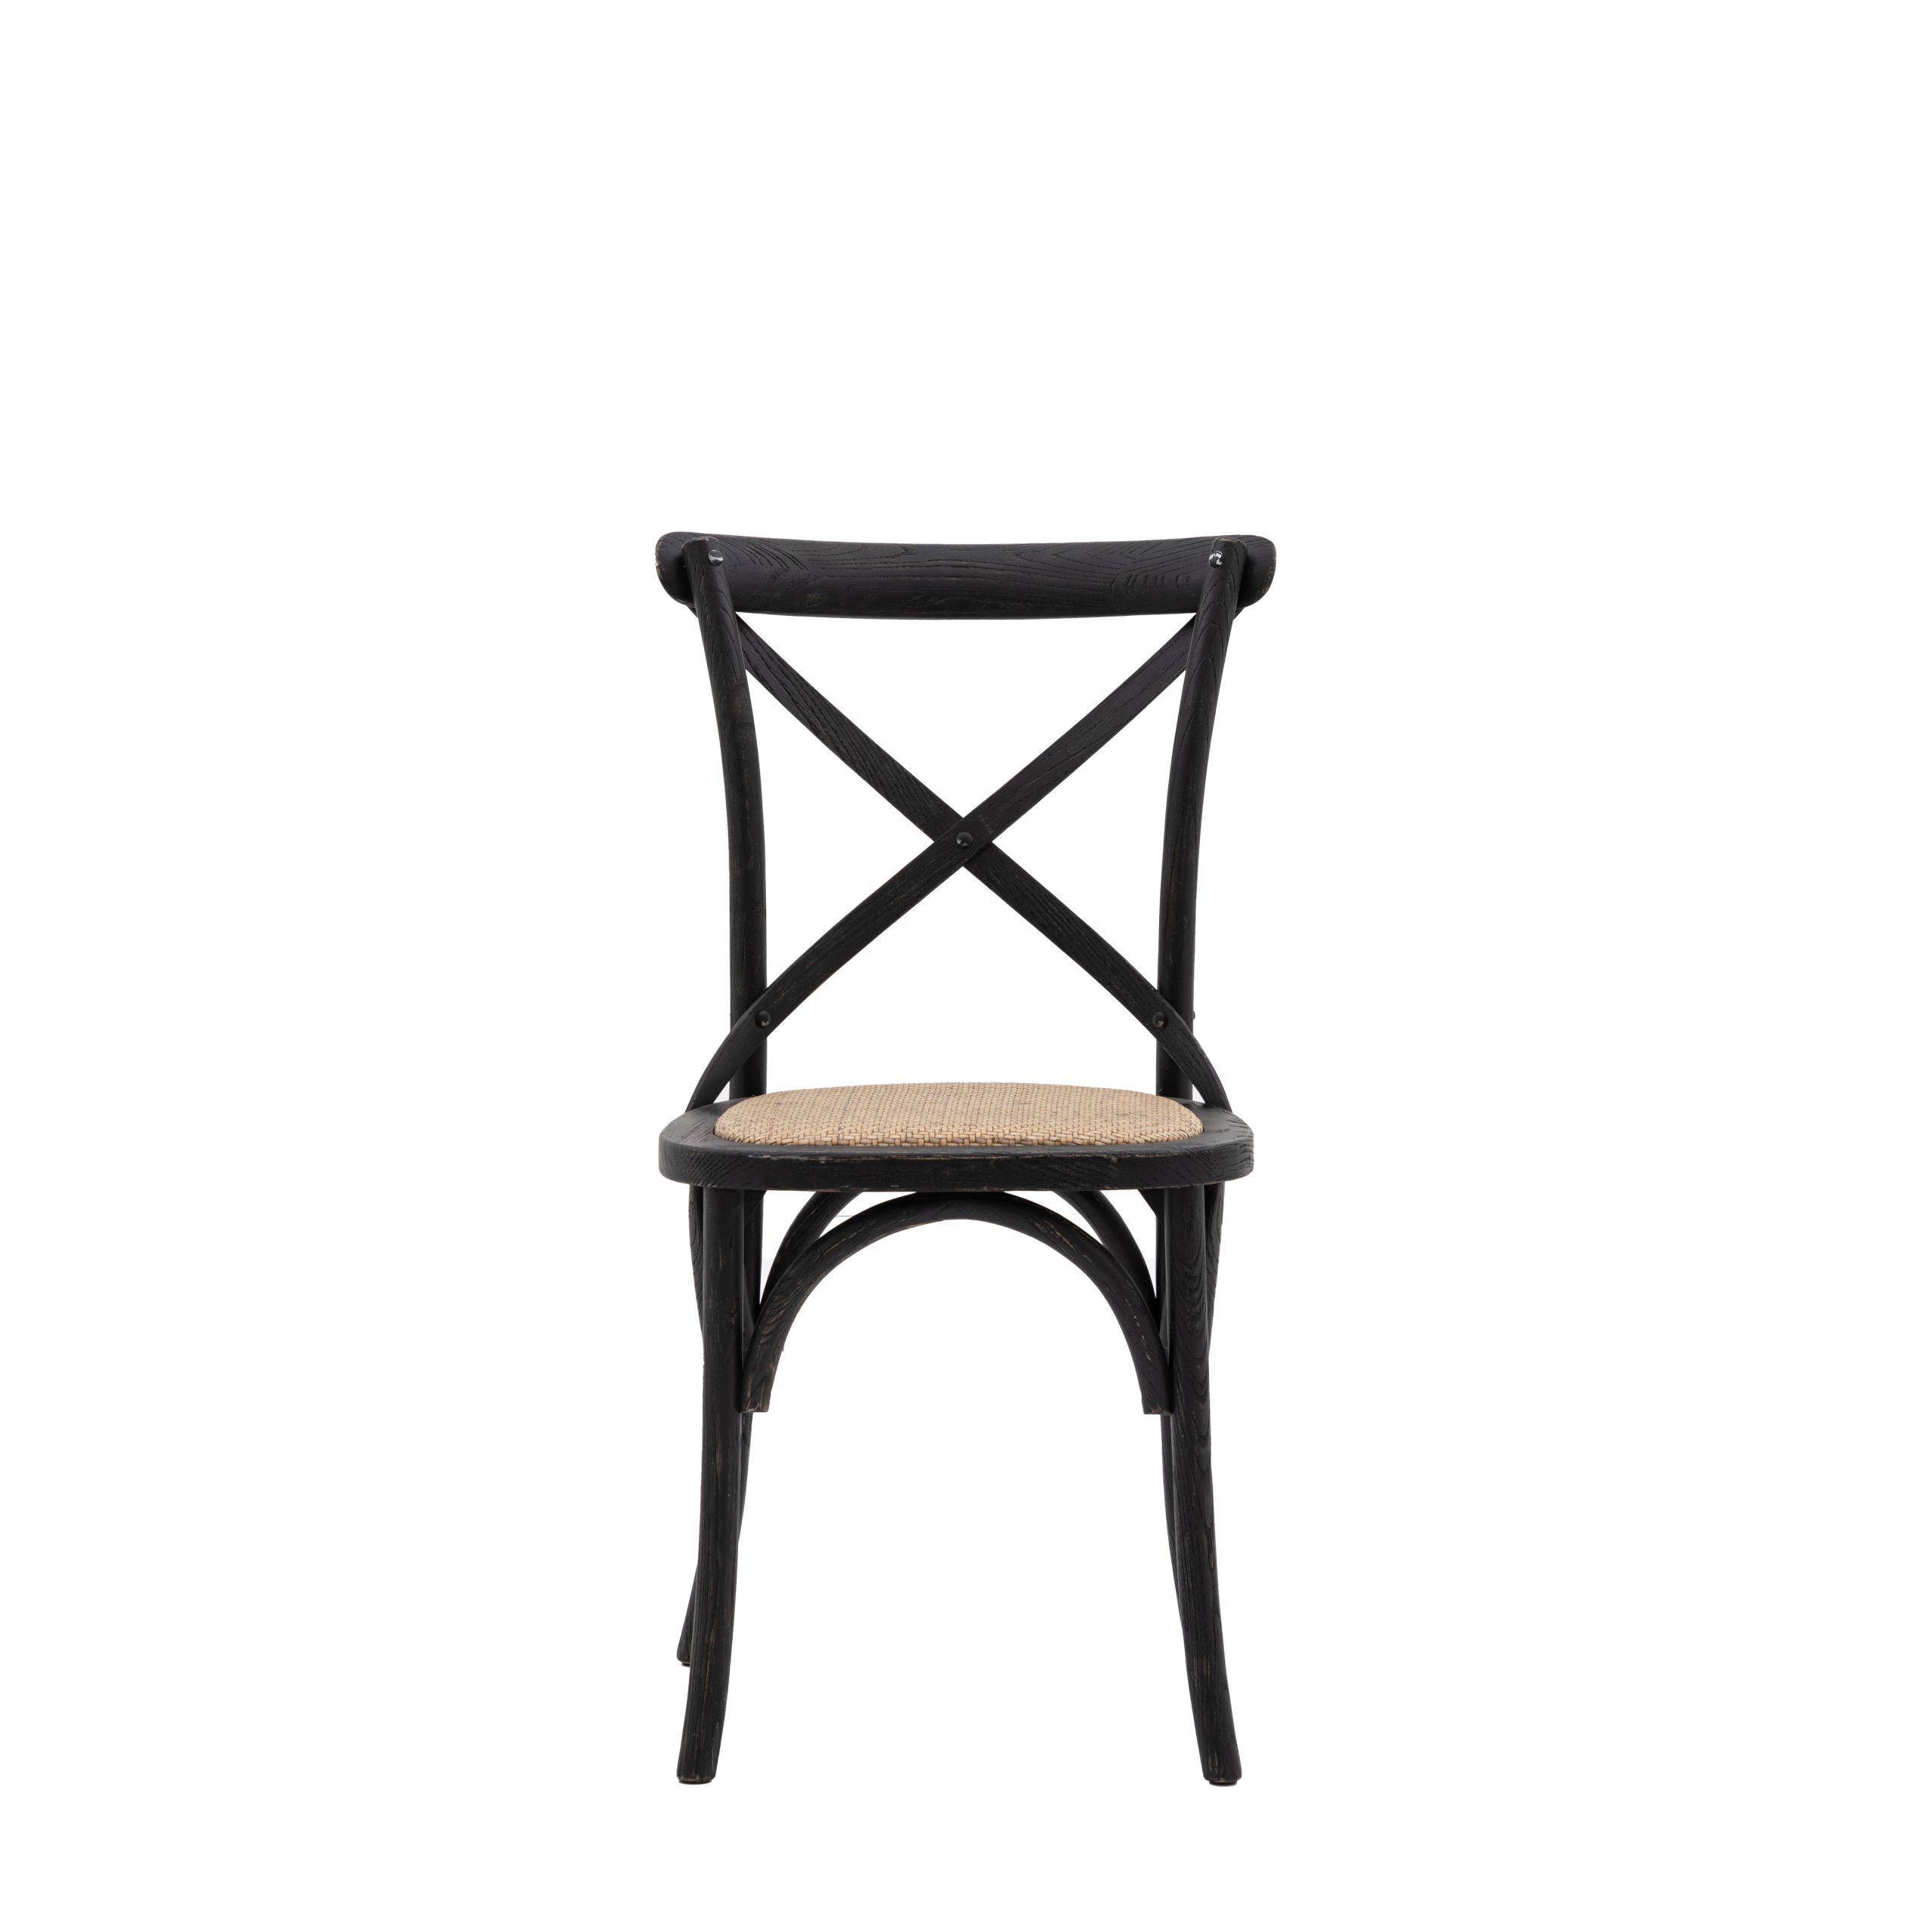 Gallery Direct Cafe Chair Black/Rattan (Set of 2)